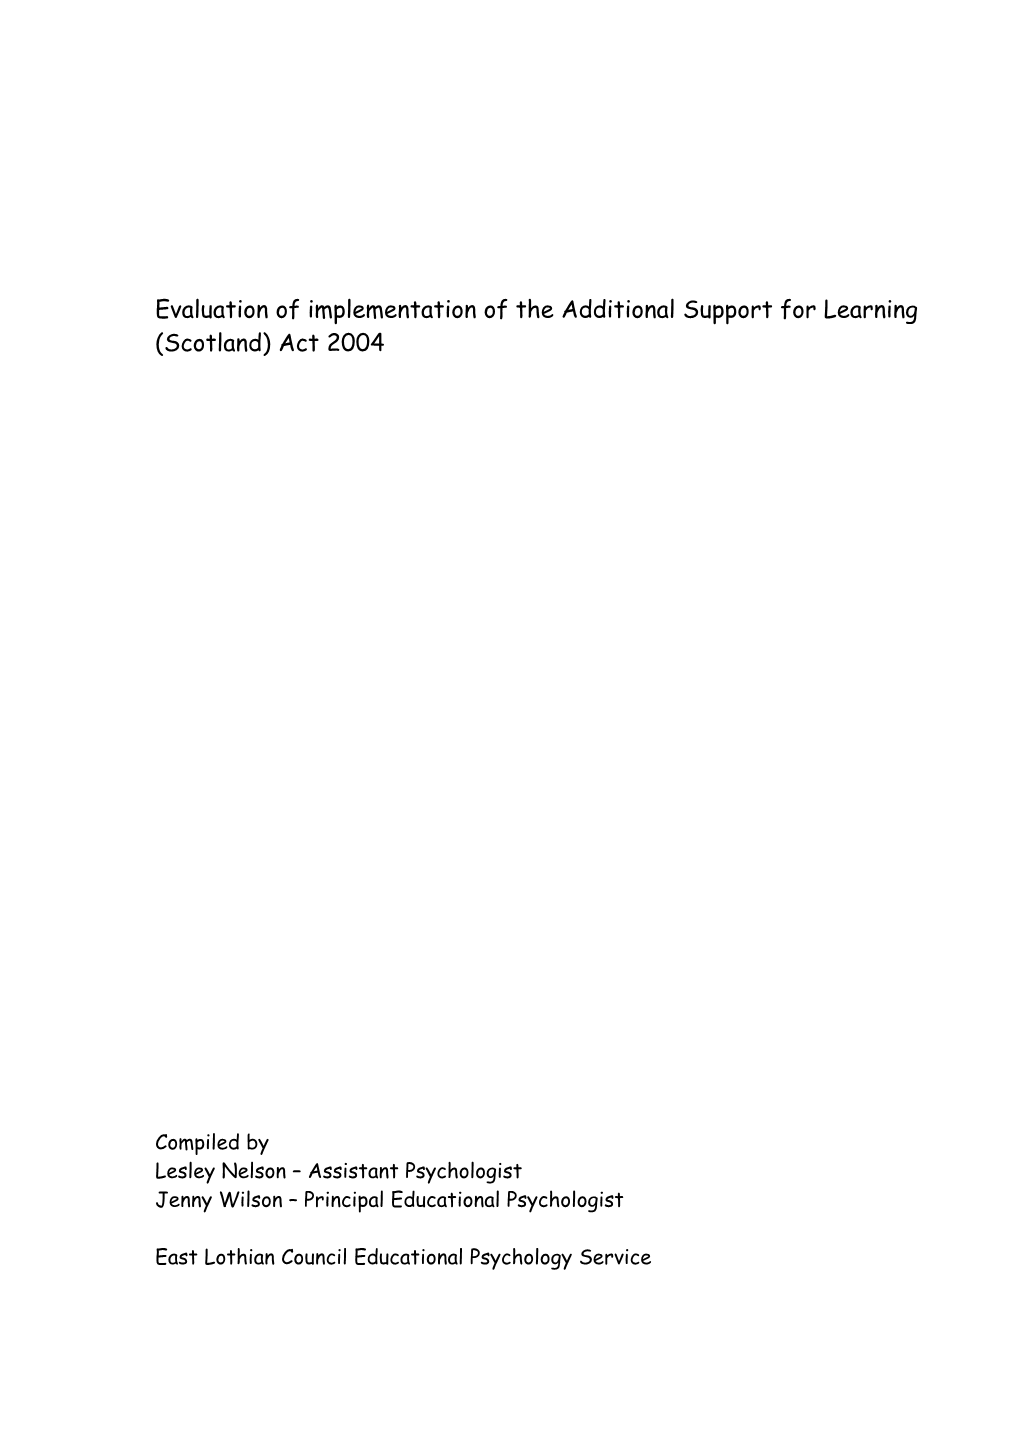 Evaluation of Implementation of the Additional Support for Learning (Scotland) Act 2004